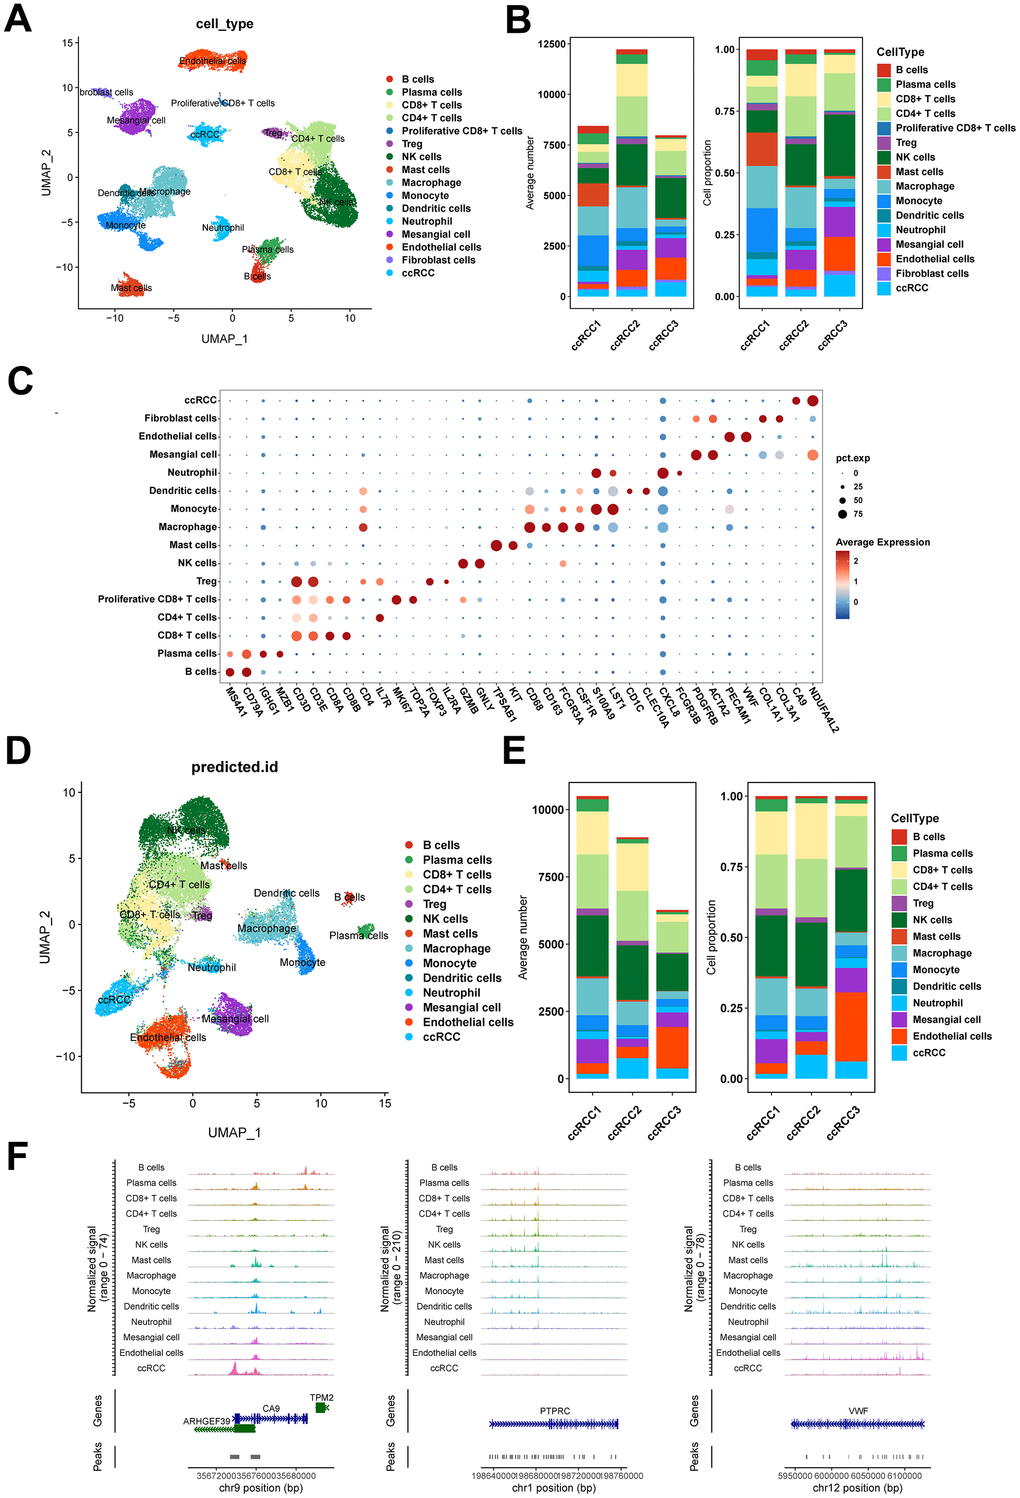 Single-cell transcriptome and epigenome profiles of ccRCC. (A) UMAP embedding of cells from scRNA-seq data. (B) Bar plots showing the number and fraction of each cell type in different samples in scRNA-seq data. (C) Dot plot displaying the expression patterns of marker genes for each cell type in scRNA-seq data. (D) UMAP embedding of cells from scATAC-seq data. (E) Bar plots showing the number and fraction of each cell type in different samples in scATAC-seq data. (F) Chromatin accessibility profiles of marker genes for each cell type in scATAC-seq data.